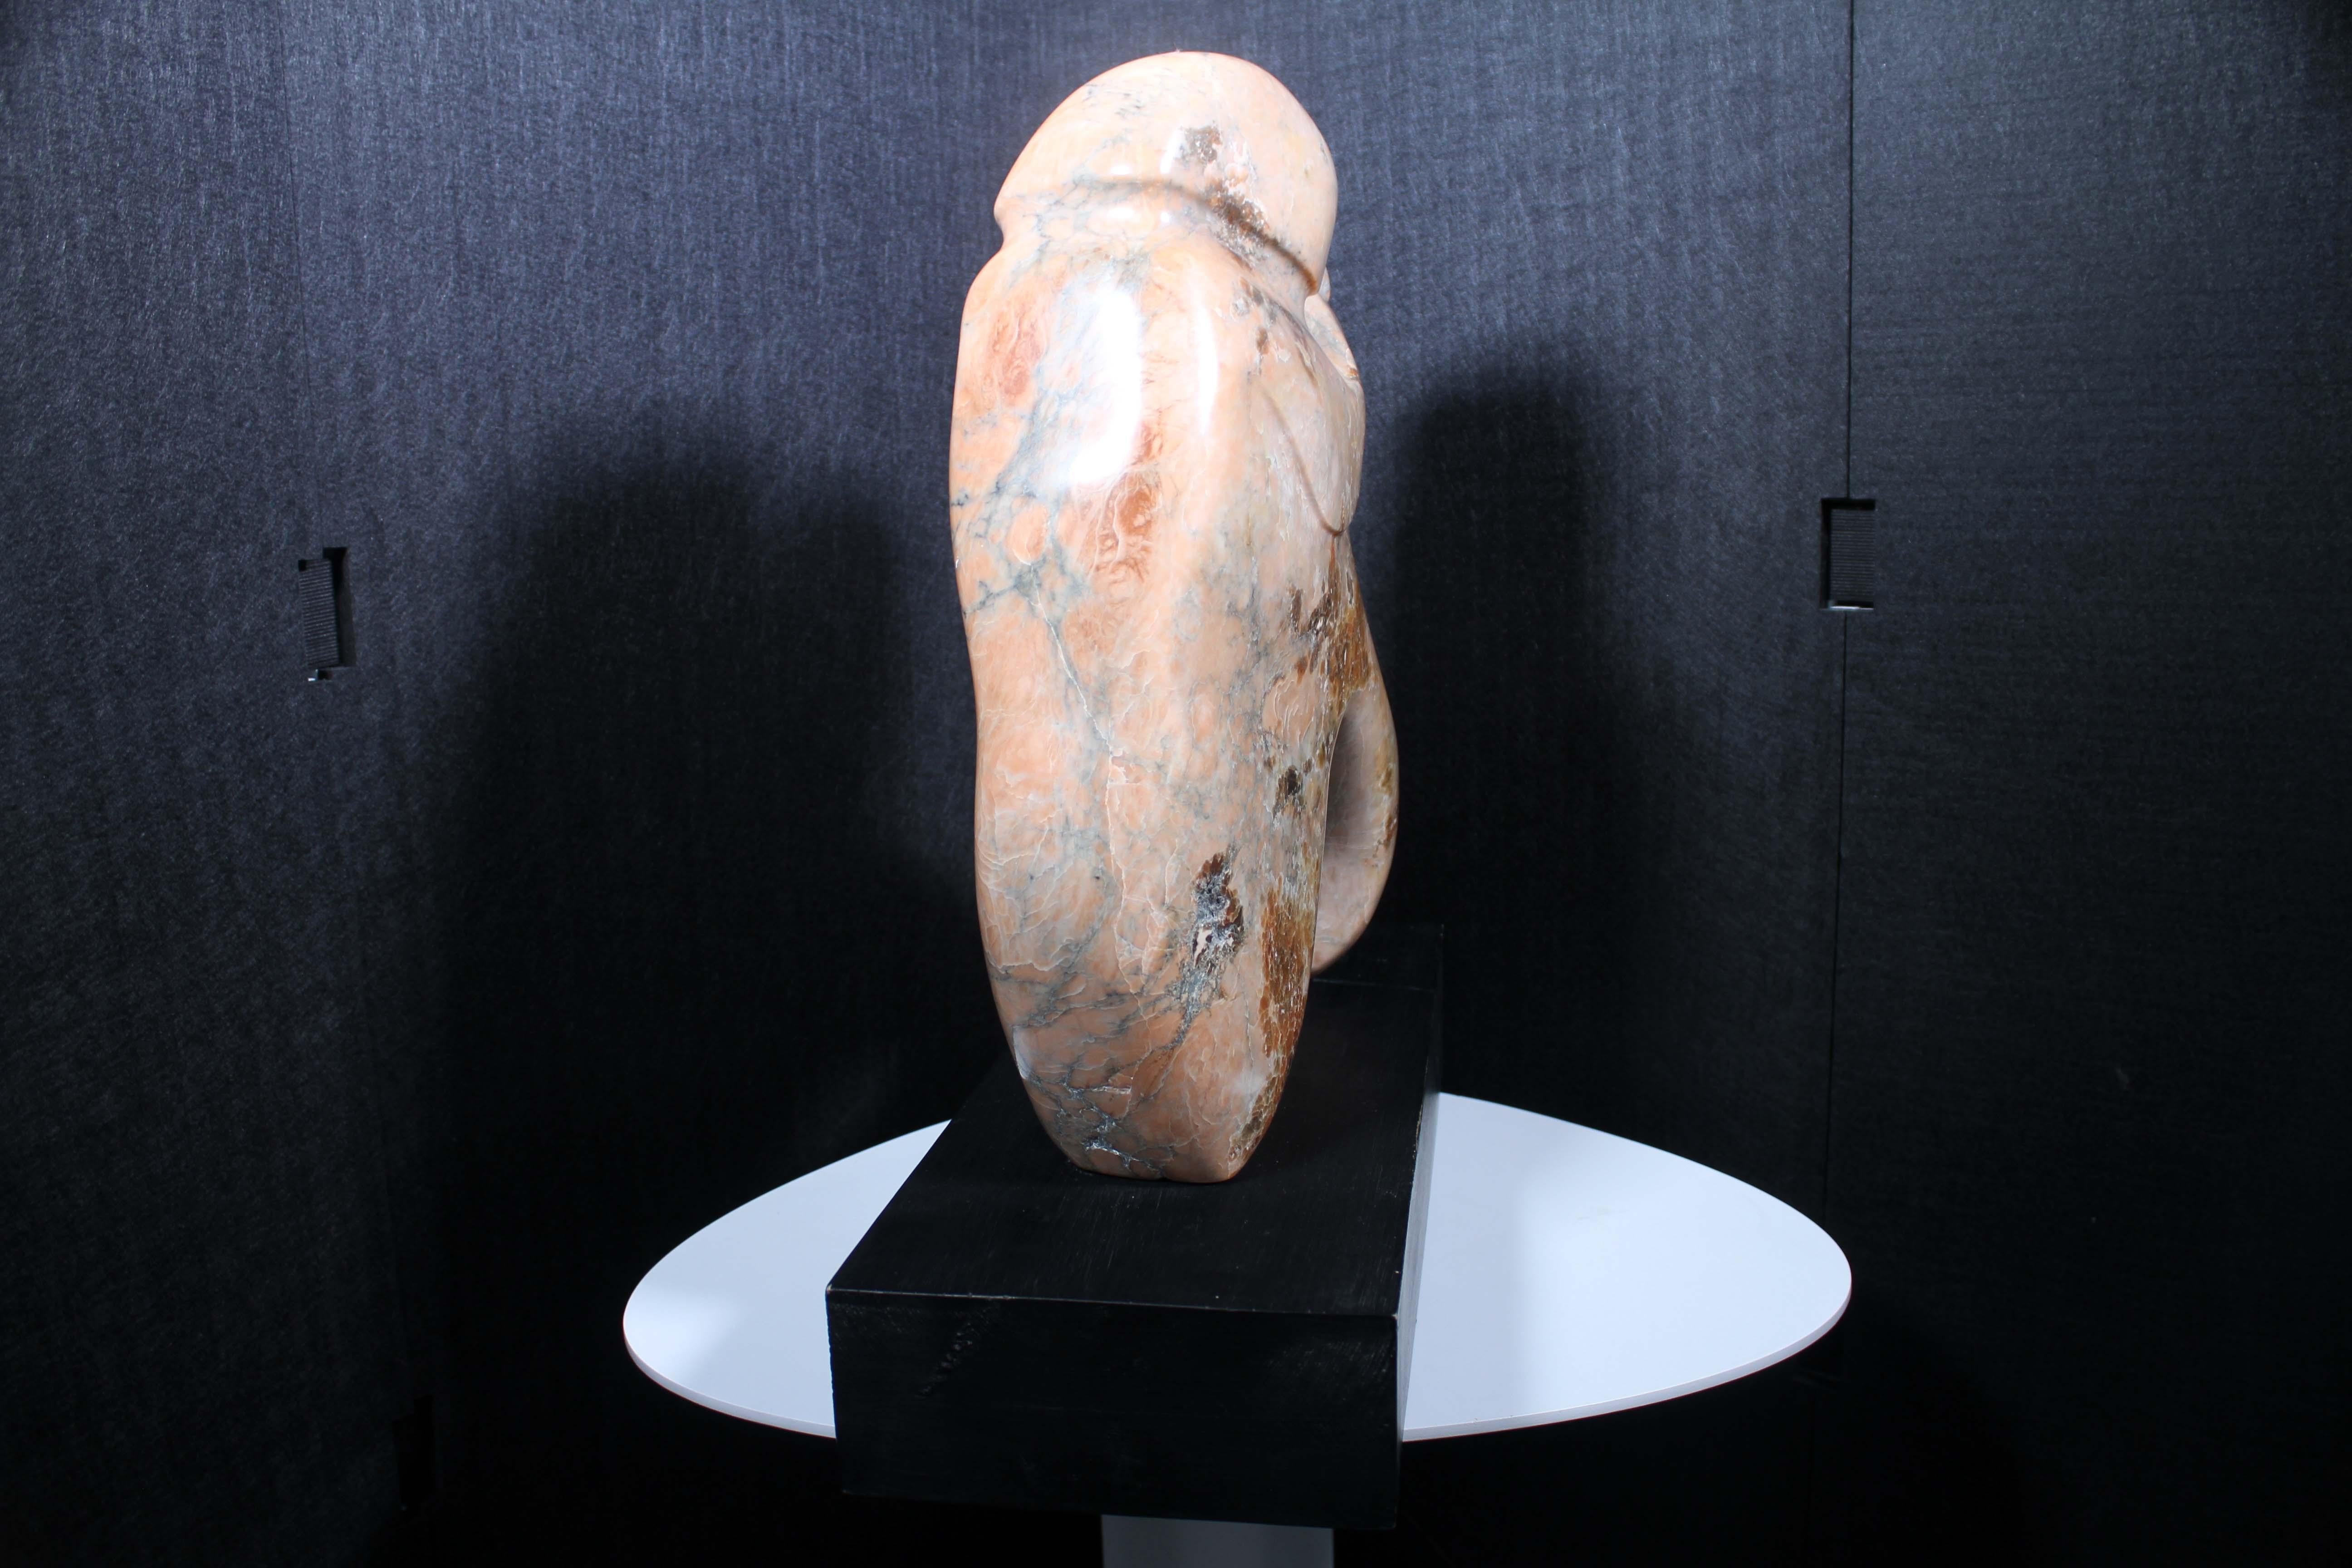 An intriguing Verona pink marble biomorphic abstract sculpture on a black base. The perfect accent in a modern or contemporary space. Dimensions: 17.75